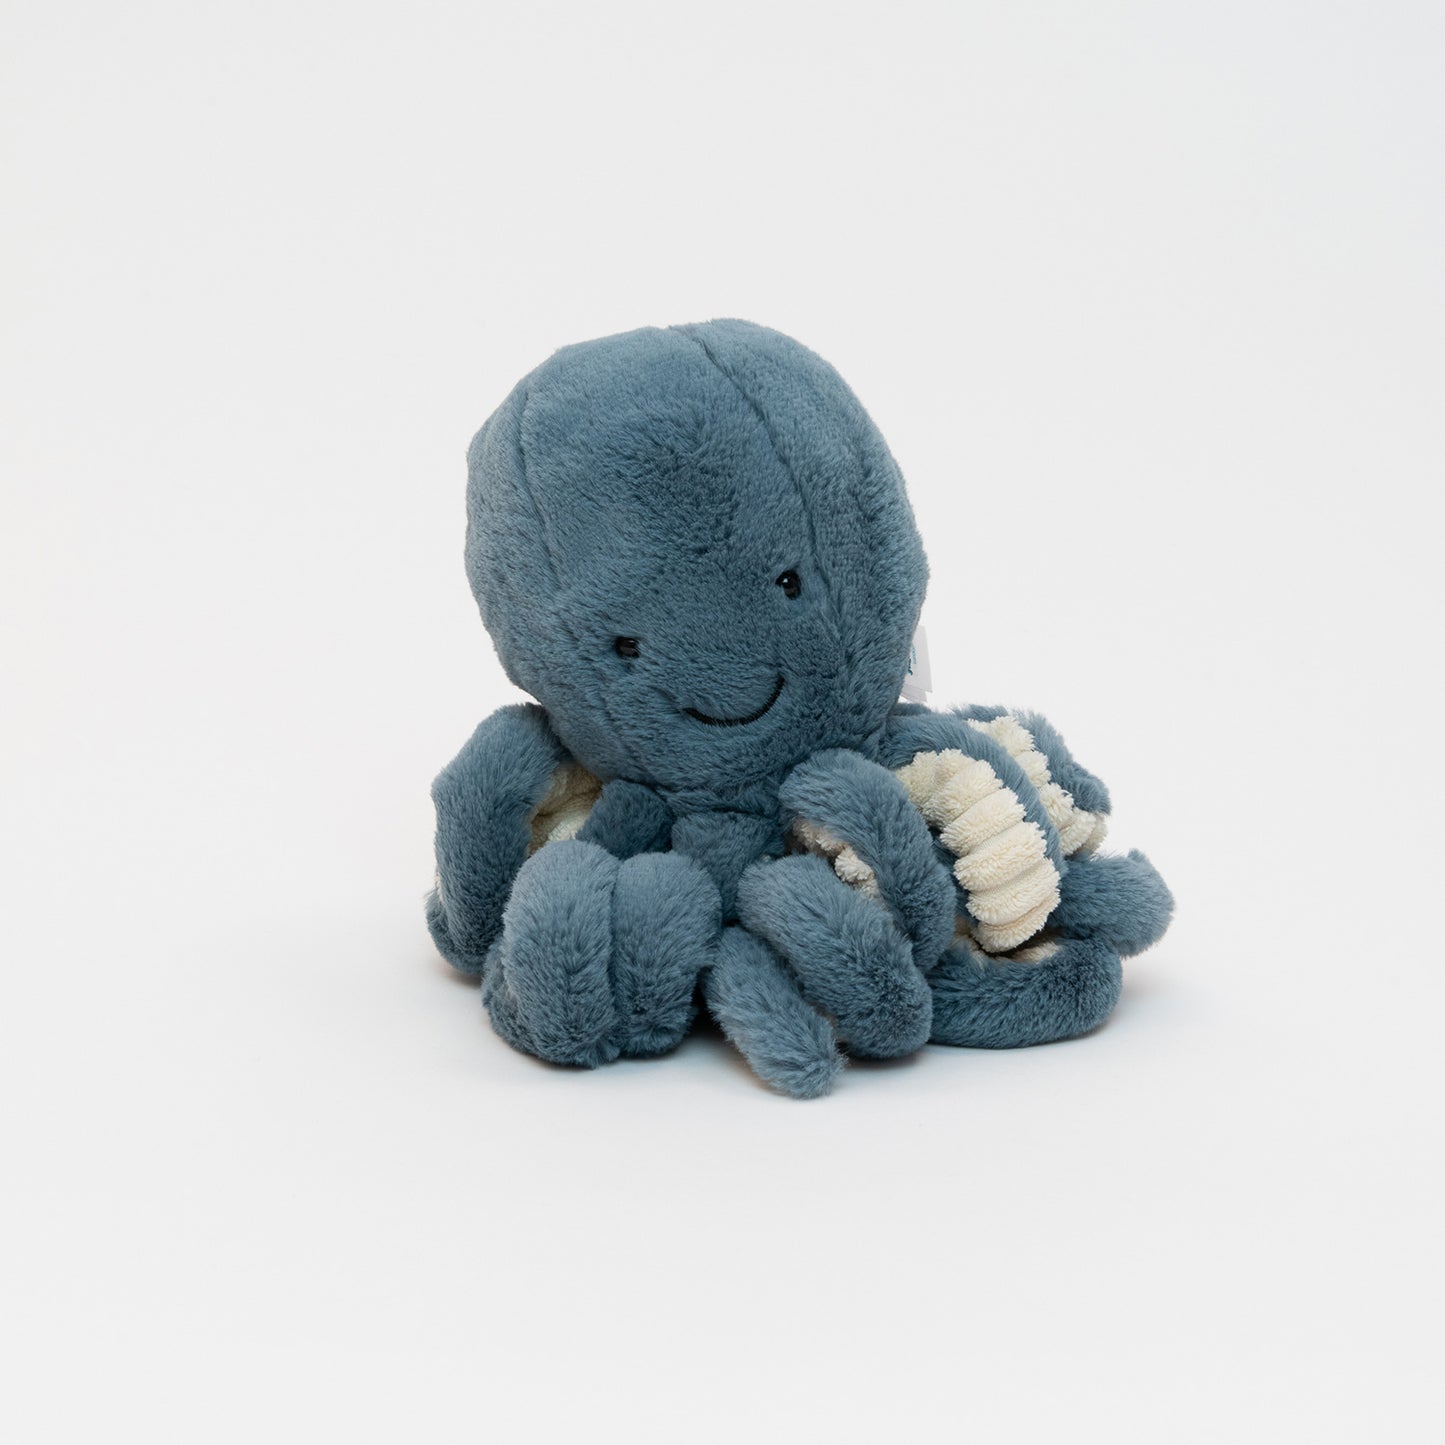 A blue Jellycat plush octopus pictured on a white background.